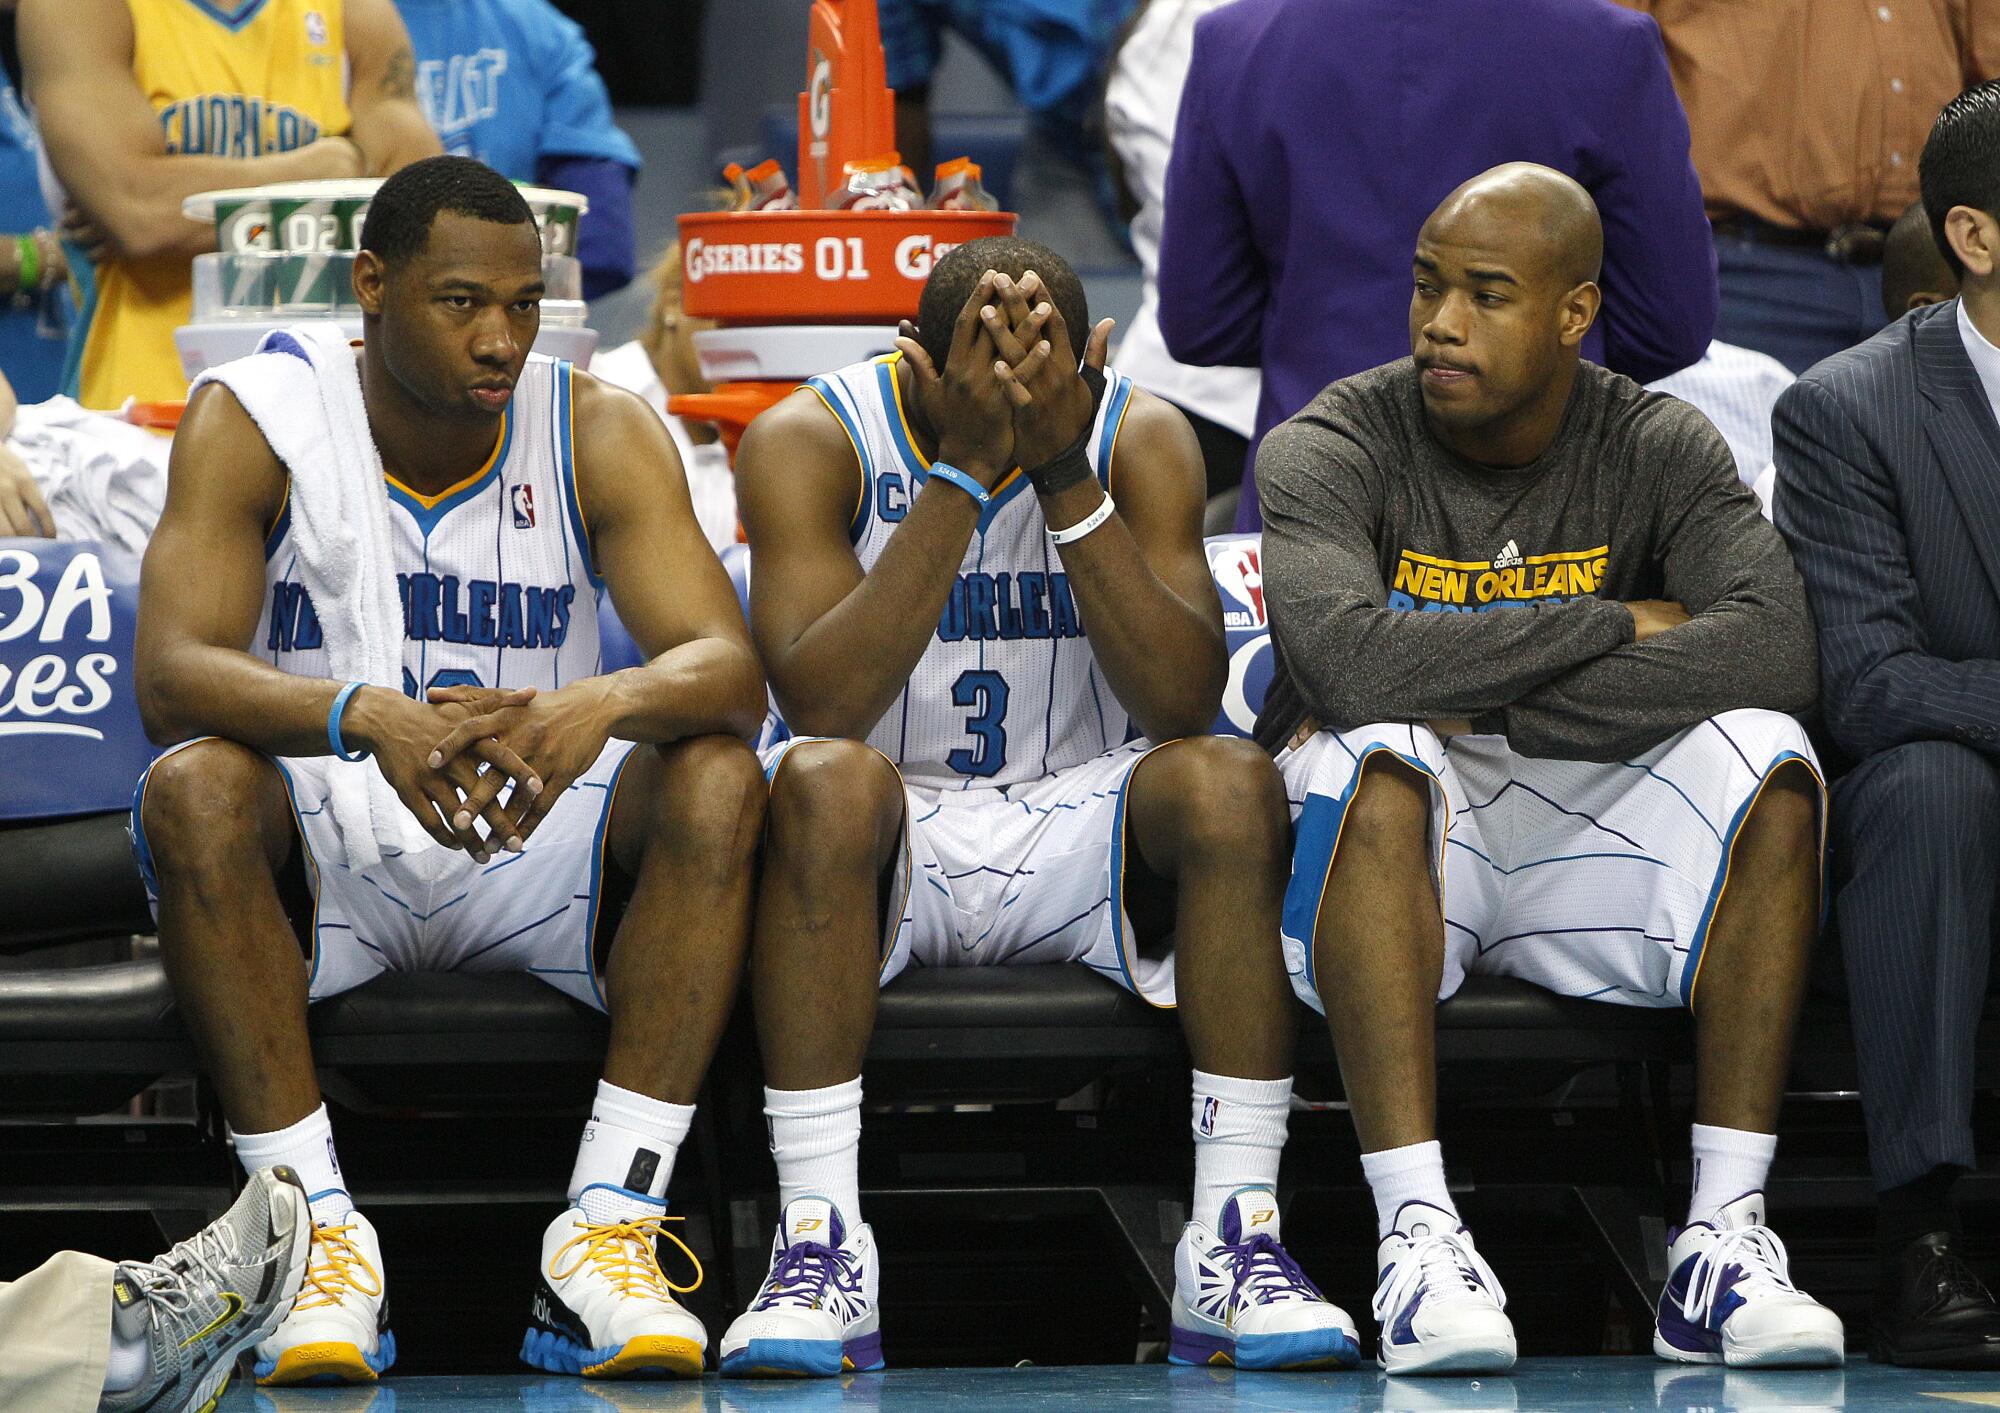 Hornets guards (from left) Willie Green, Chris Paul and Jarrett Jack react on the bench during a playoff loss to the Lakers.